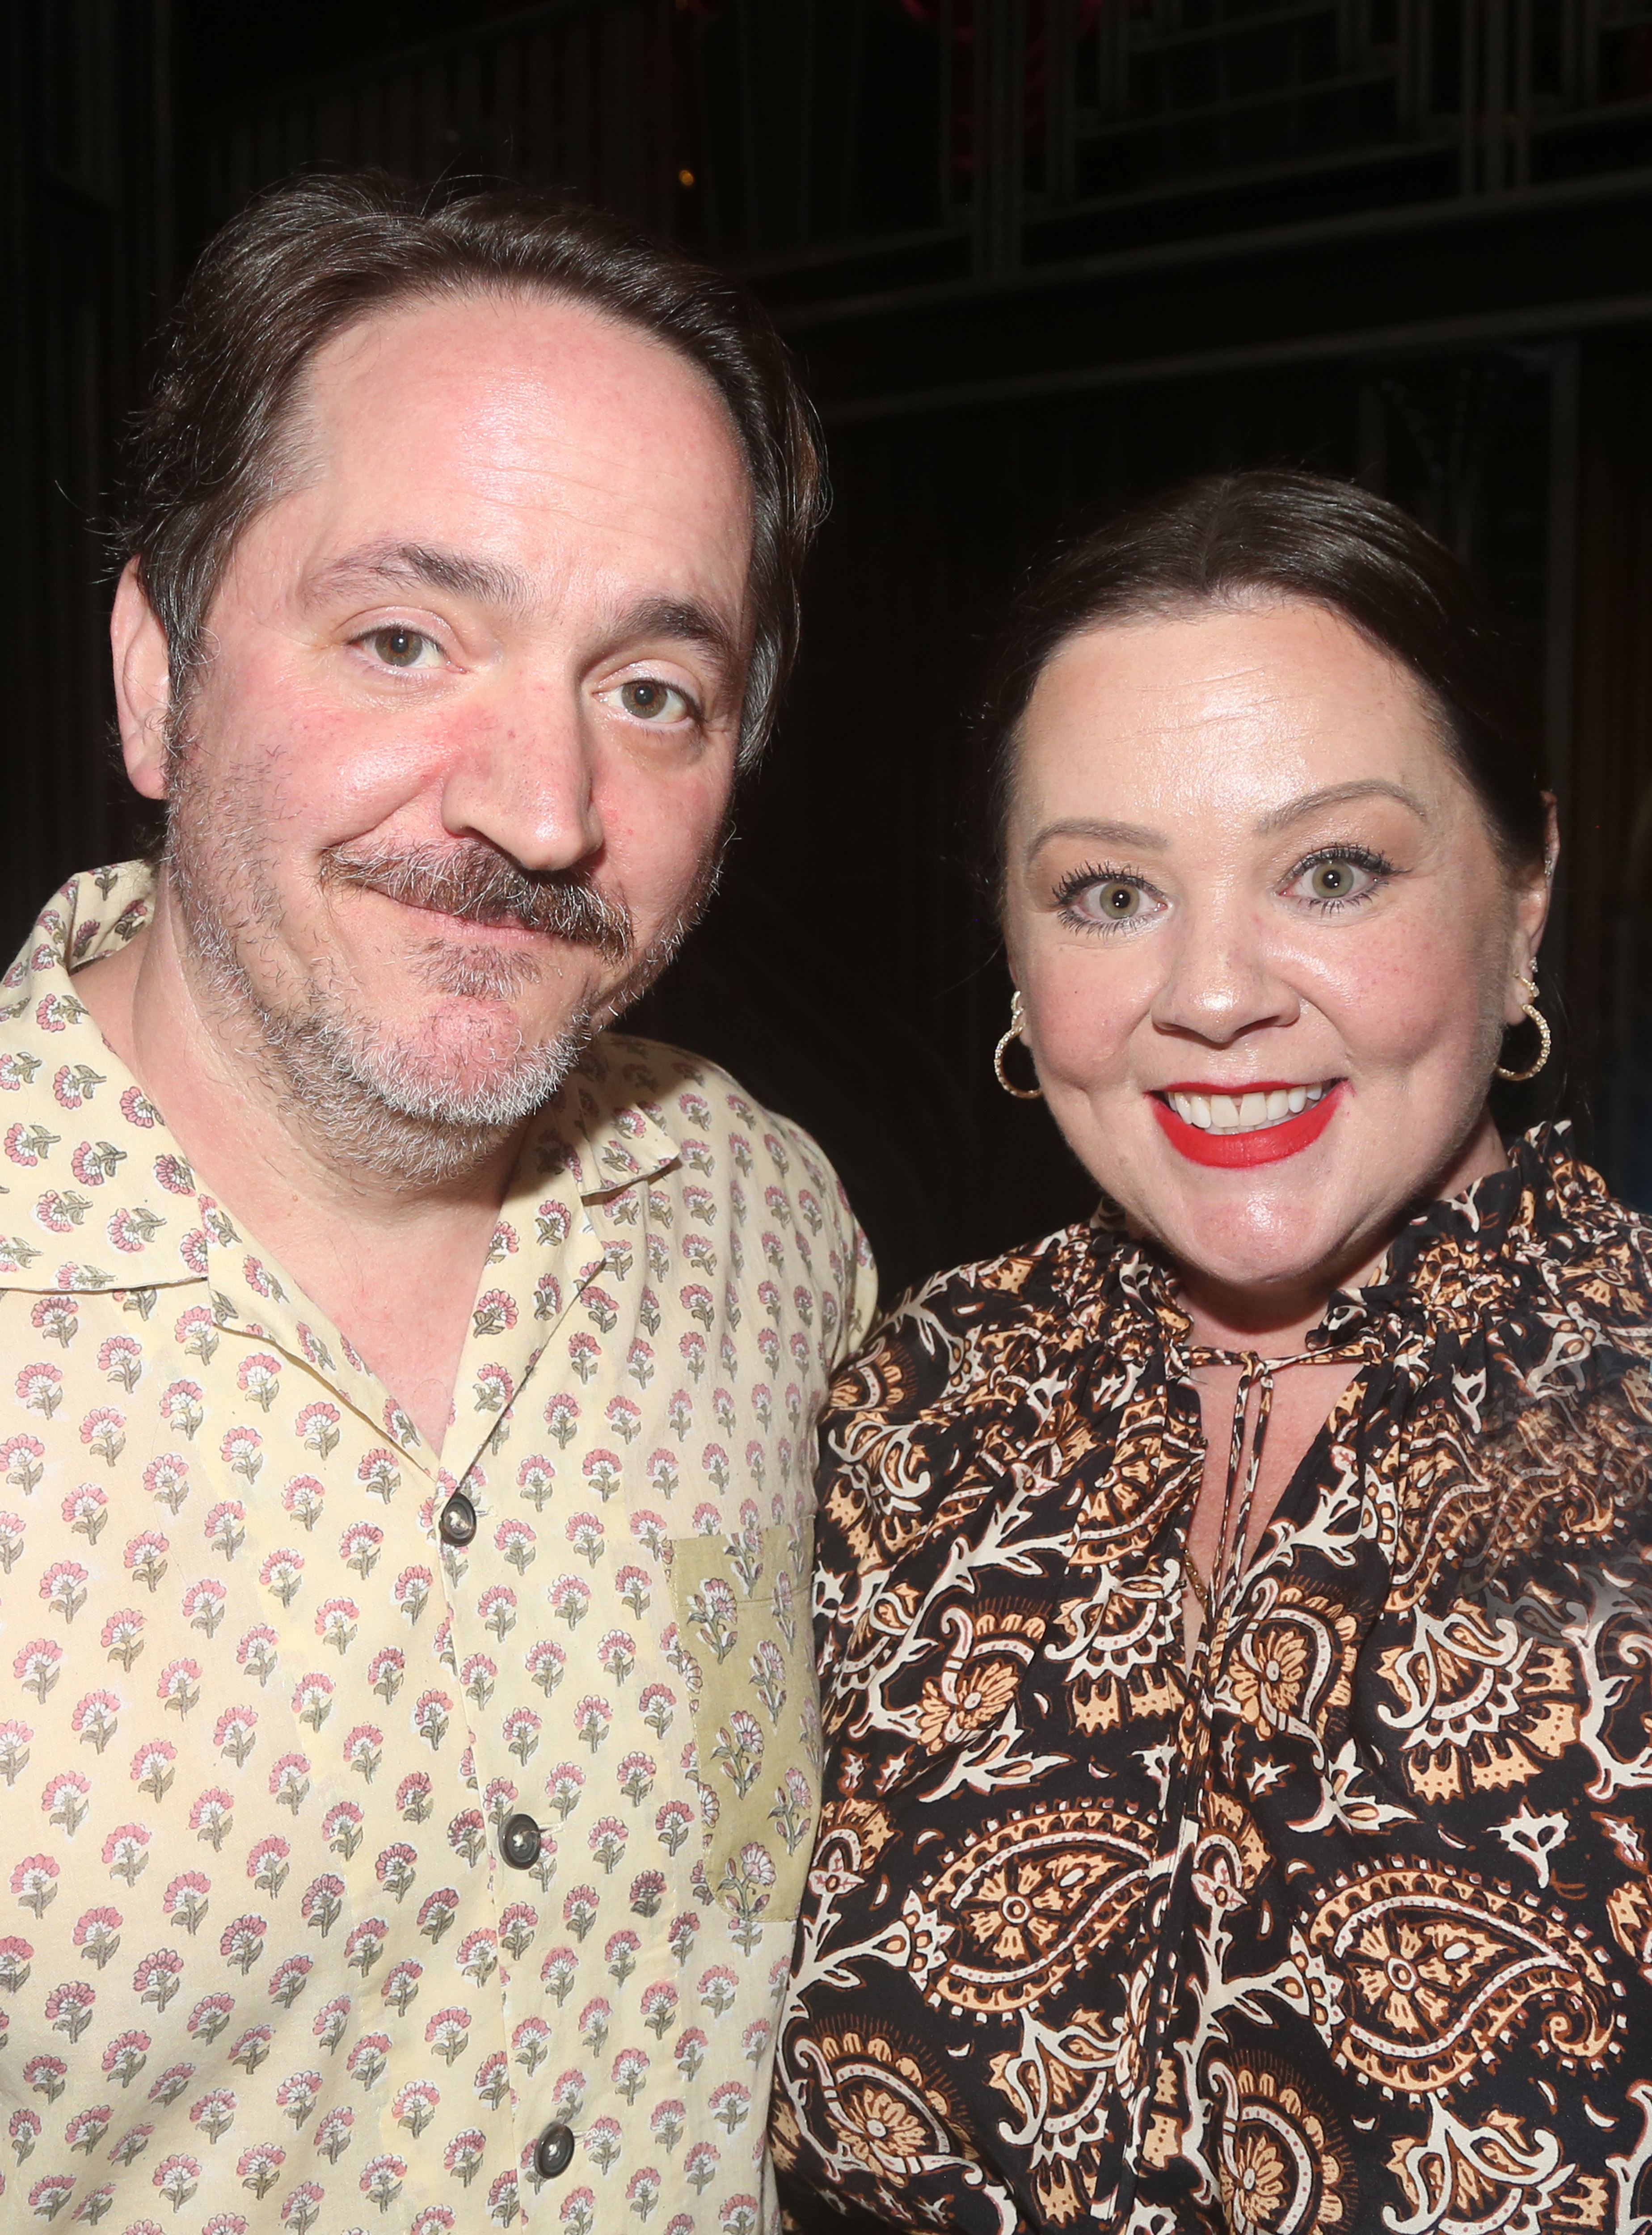 Ben Falcone and Melissa McCarthy pose backstage at the Broadway musical "Some Like it Hot!" on July 9, 2023, in New York City. | Source: Getty Images